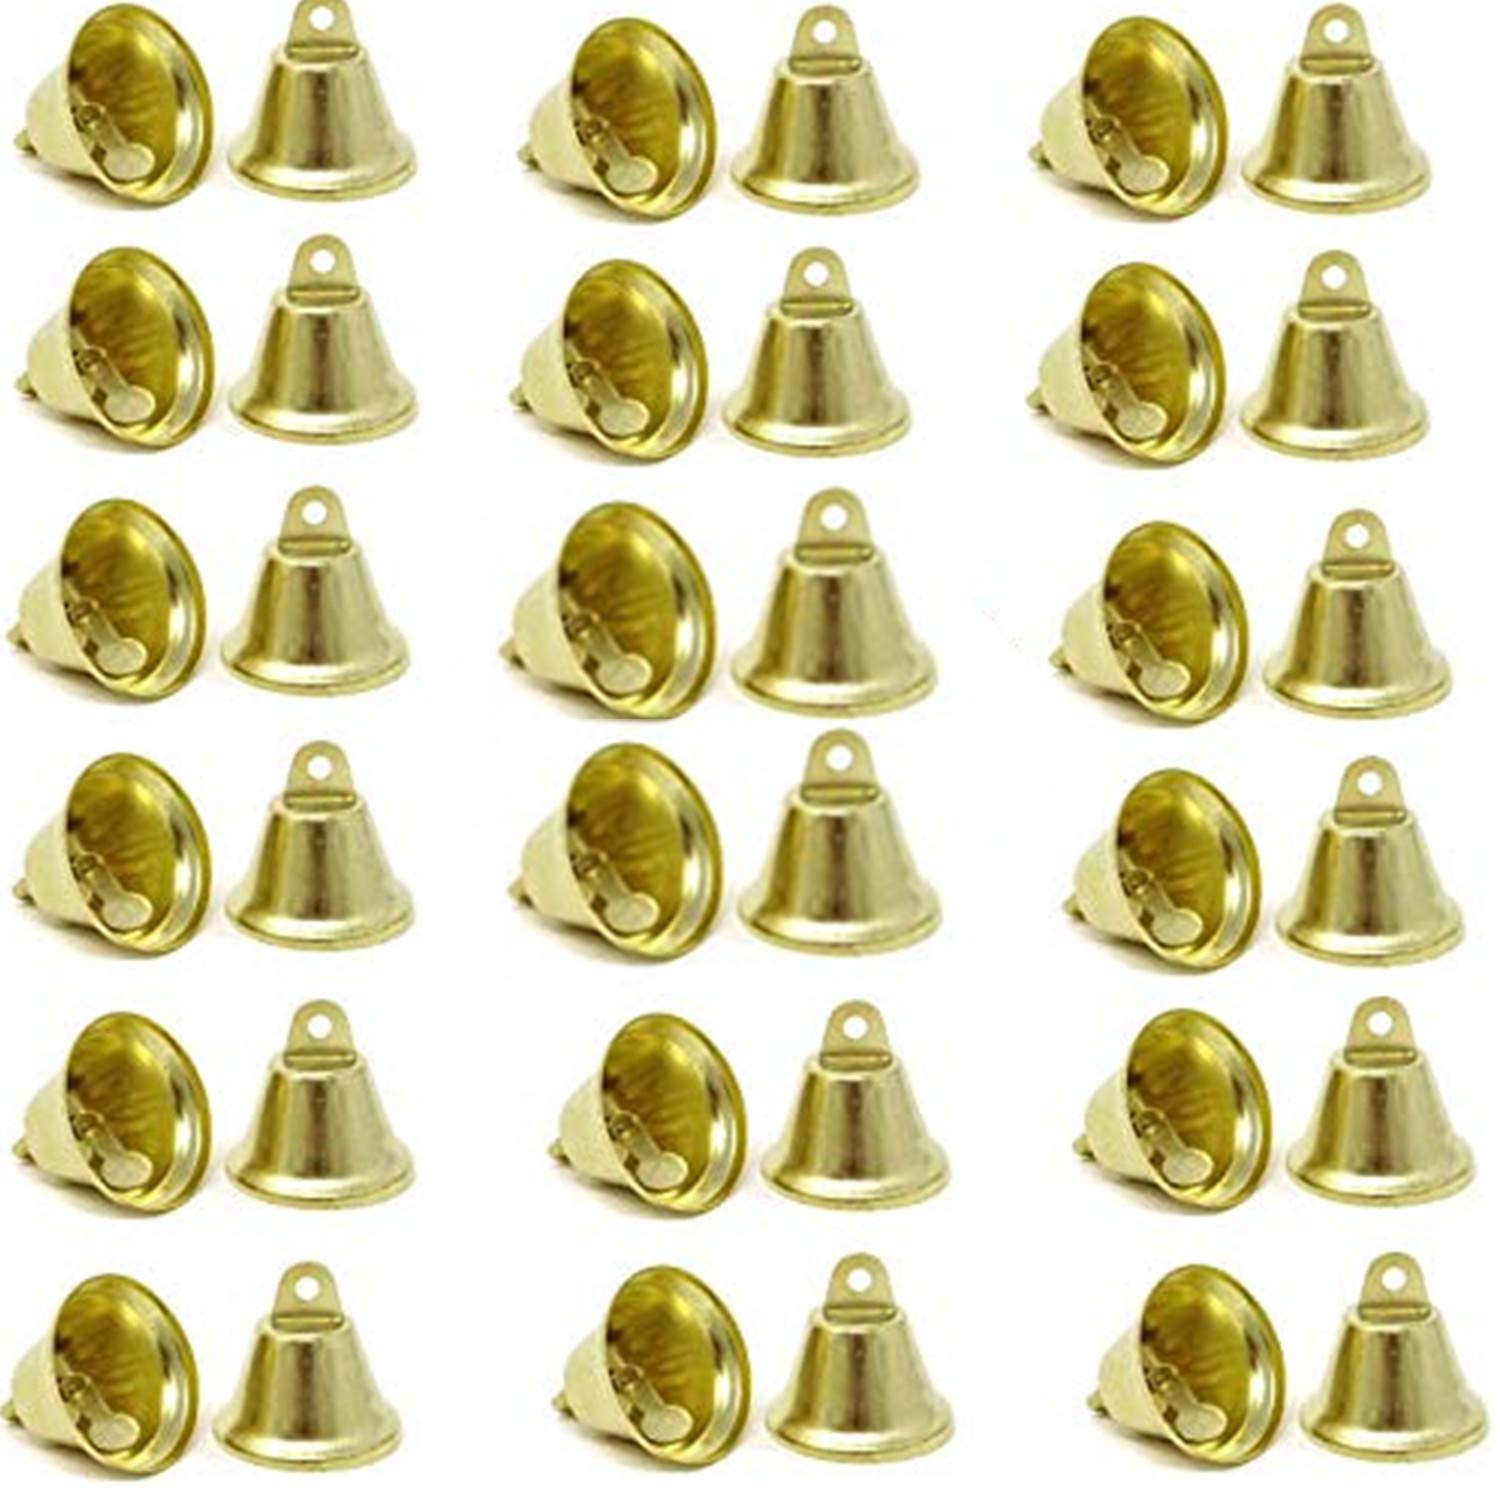 uxcell Jingle Bells, 1/4 100pcs Small Craft Bells for DIY Holiday  Decoration, Musical Party, Home, Festival, Wedding, Gold Tone